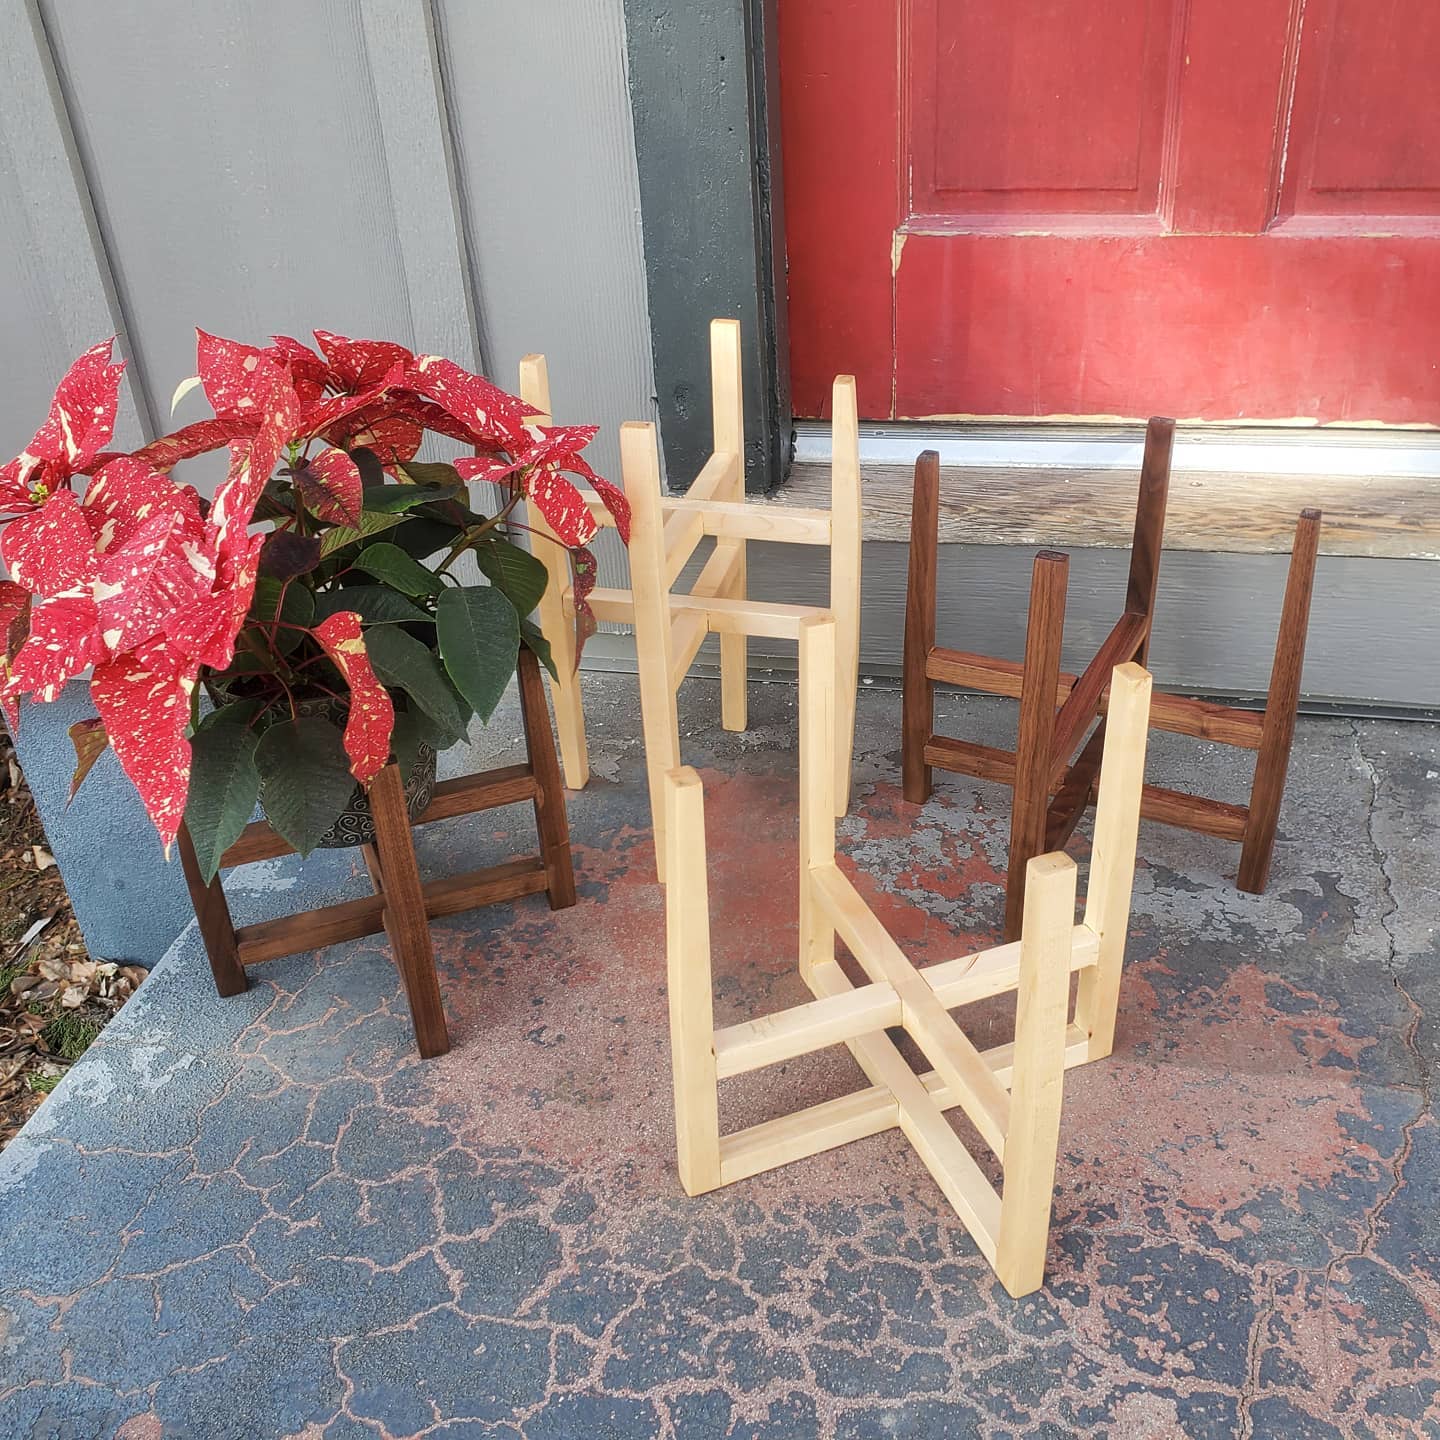 4 mid-mod style plant stands made out of Maple or Walnut sitting on a cement porch